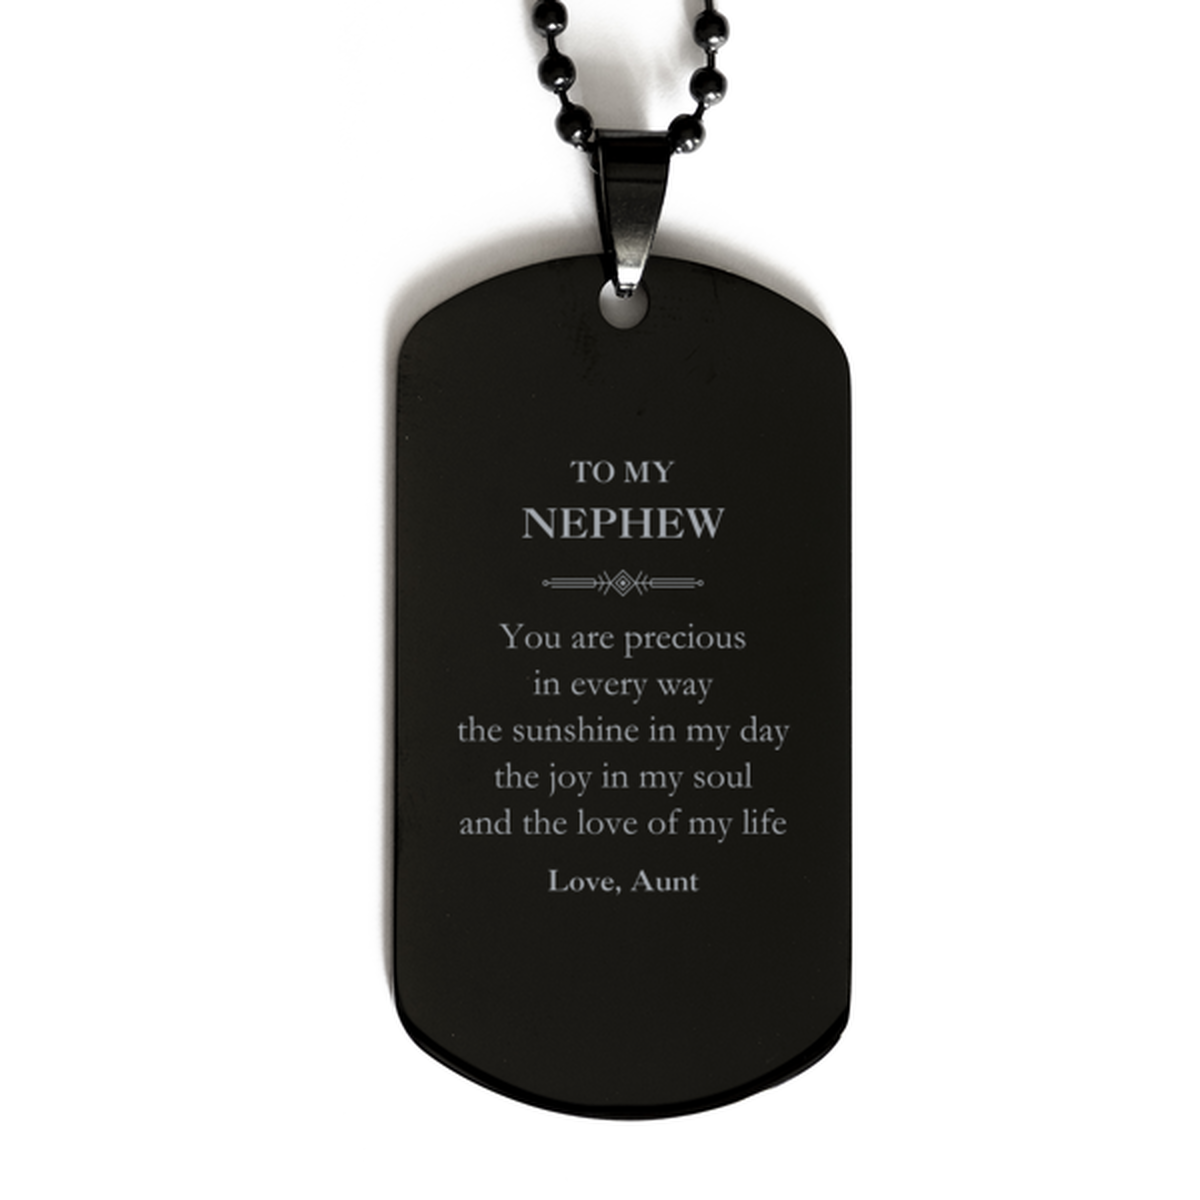 Graduation Gifts for Nephew Black Dog Tag Present from Aunt, Christmas Nephew Birthday Gifts Nephew You are precious in every way the sunshine in my day. Love, Aunt